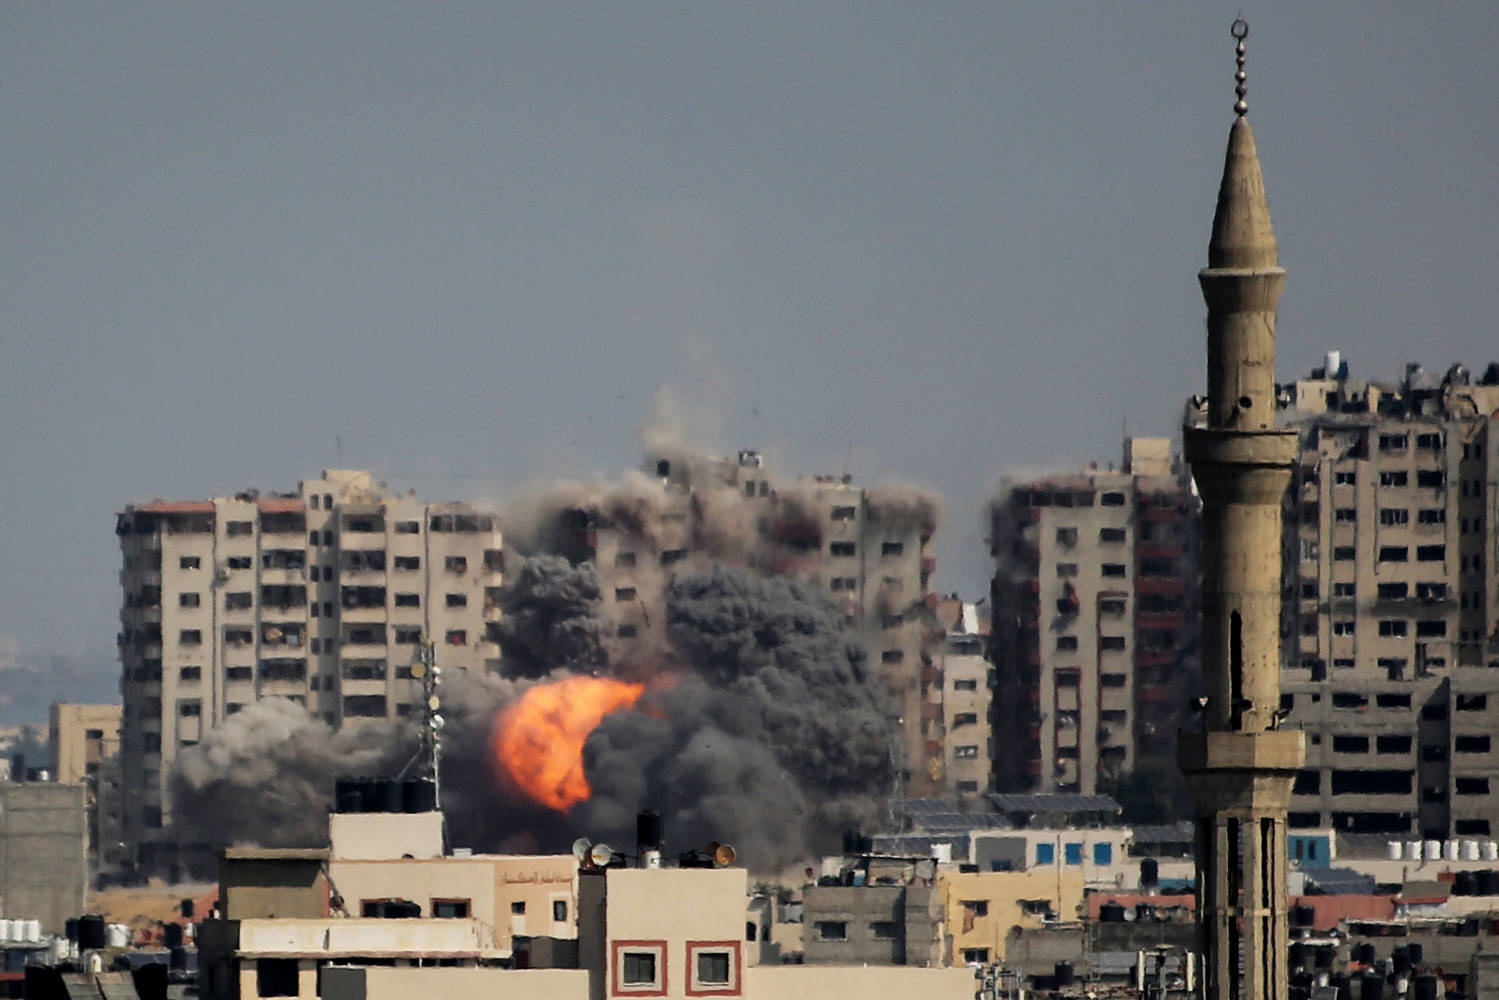 Gaza comes under sustained bombardment by Israel after Hamas attacks. Photo: Ahmad Hasaballah/Getty Images